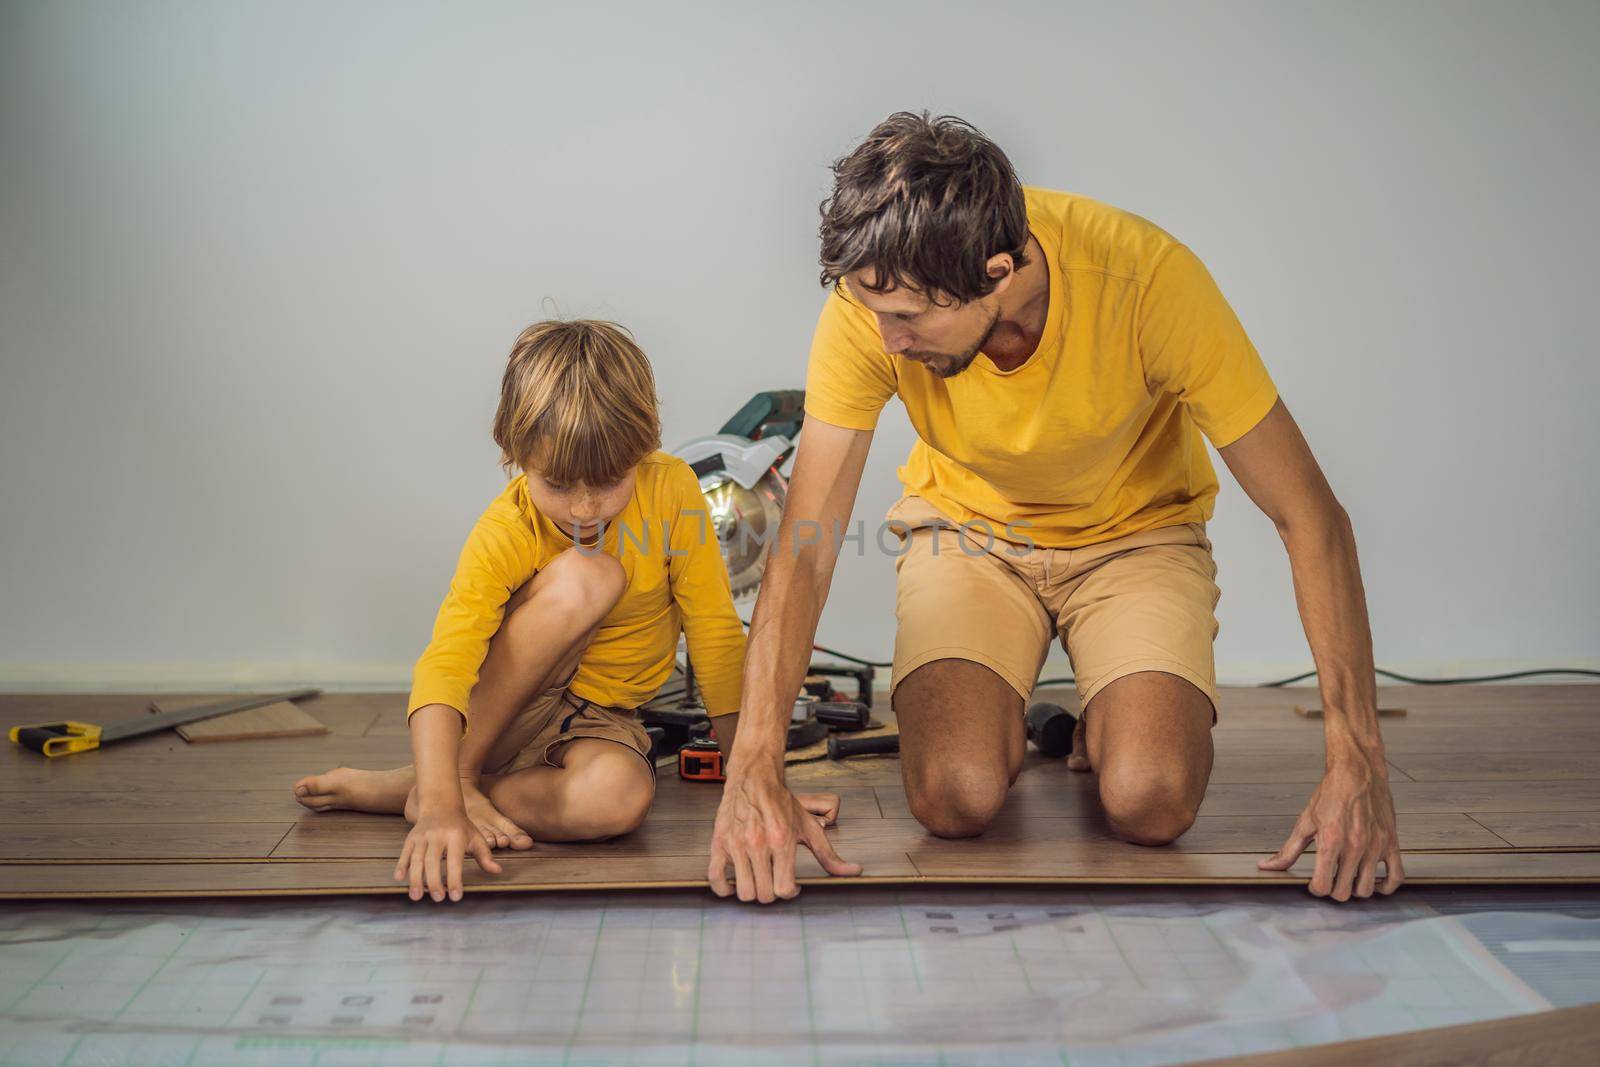 Father and son installing new wooden laminate flooring on a warm film floor. Infrared floor heating system under laminate floor.